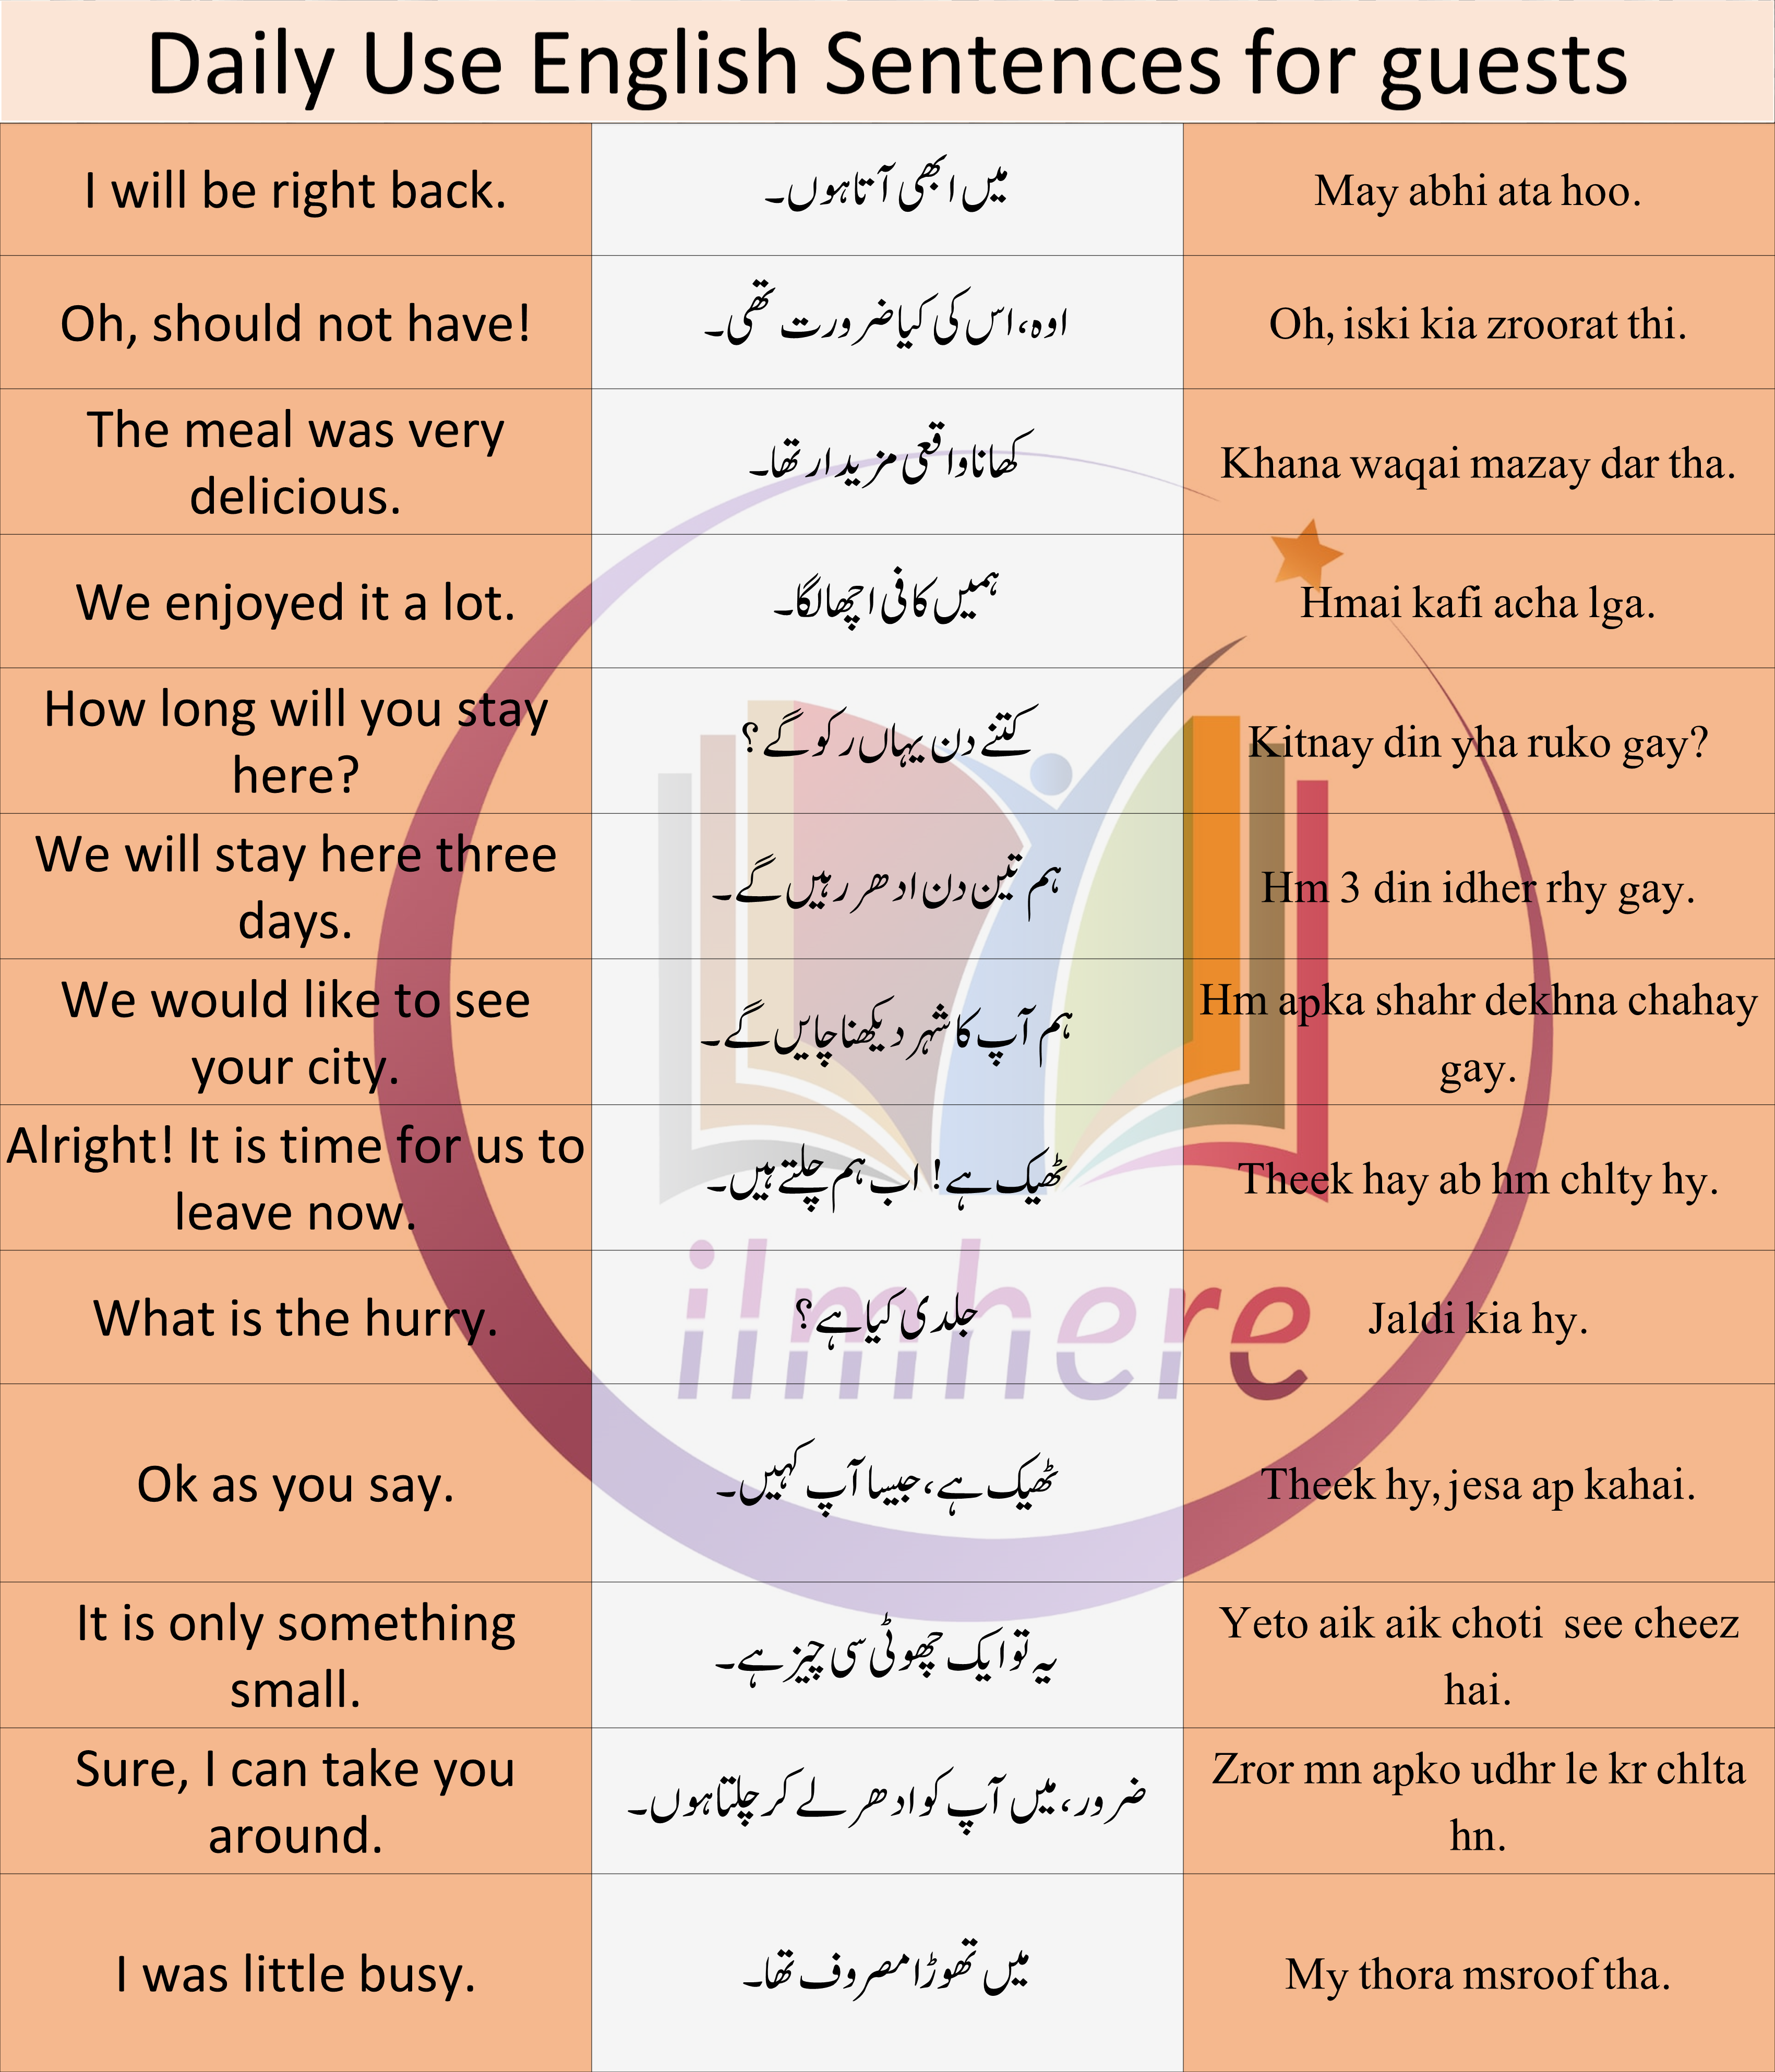 Daily Use English Sentences For guests At Home In Urdu and Hindi